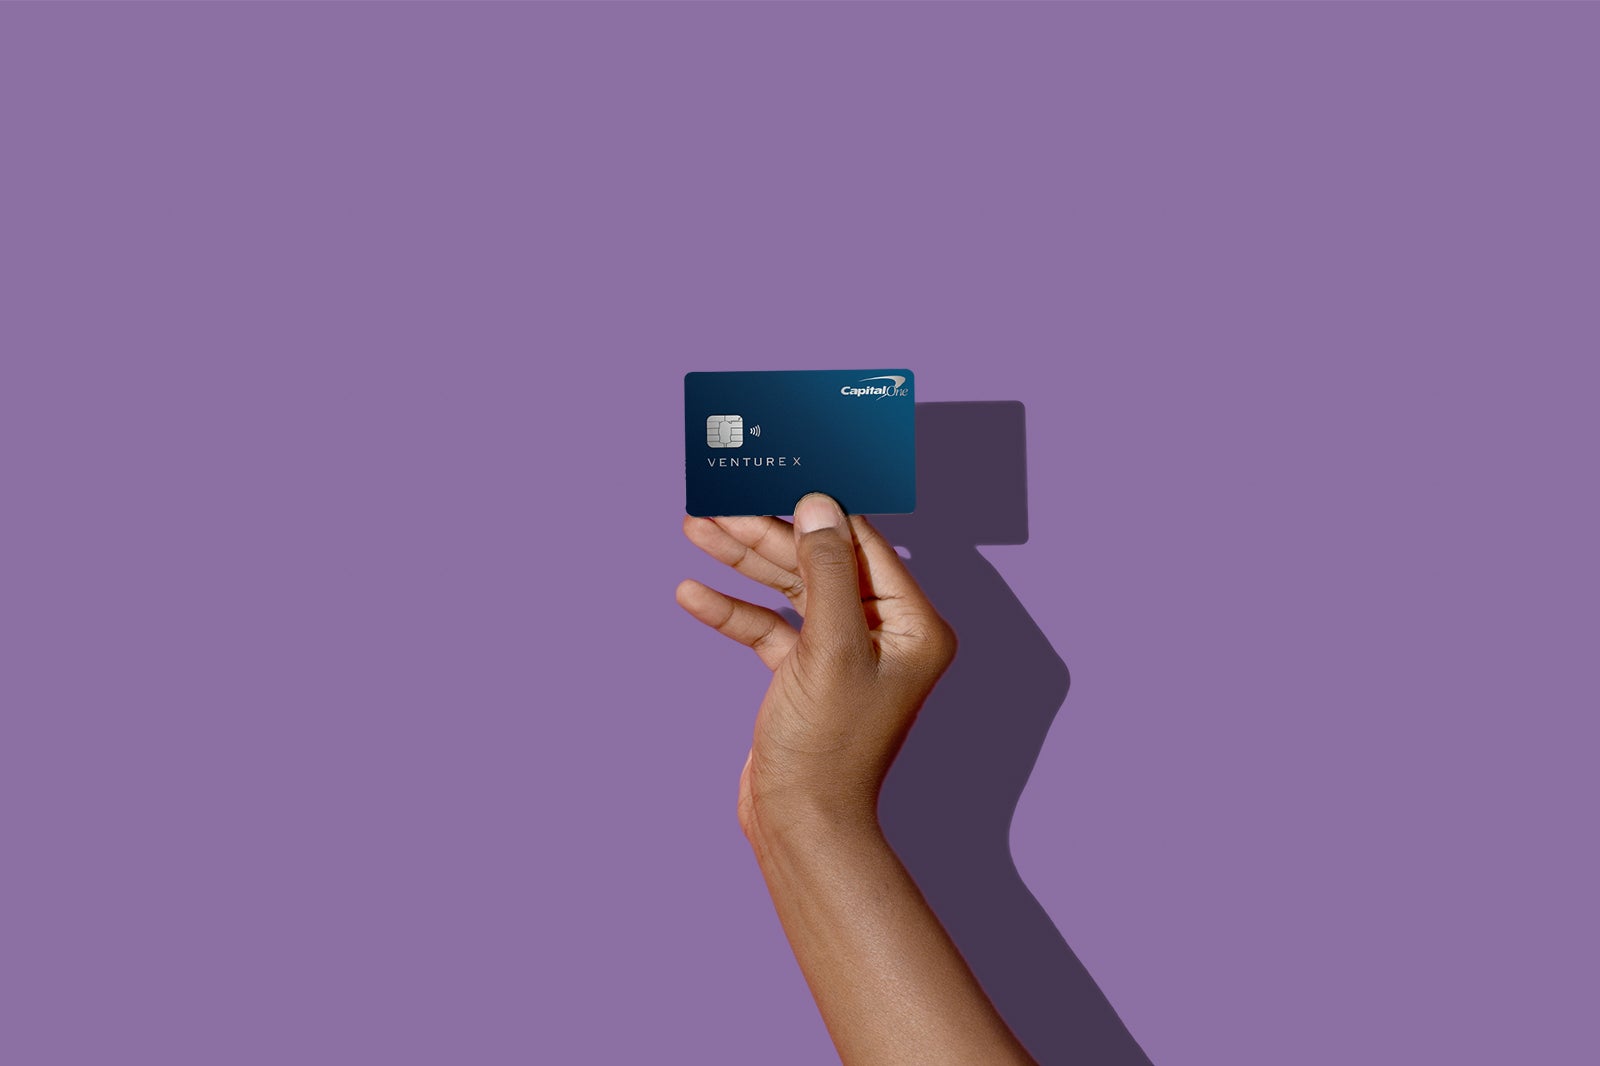 These are the credit card winners of Editors’ Choice honors at last night’s TPG Awards